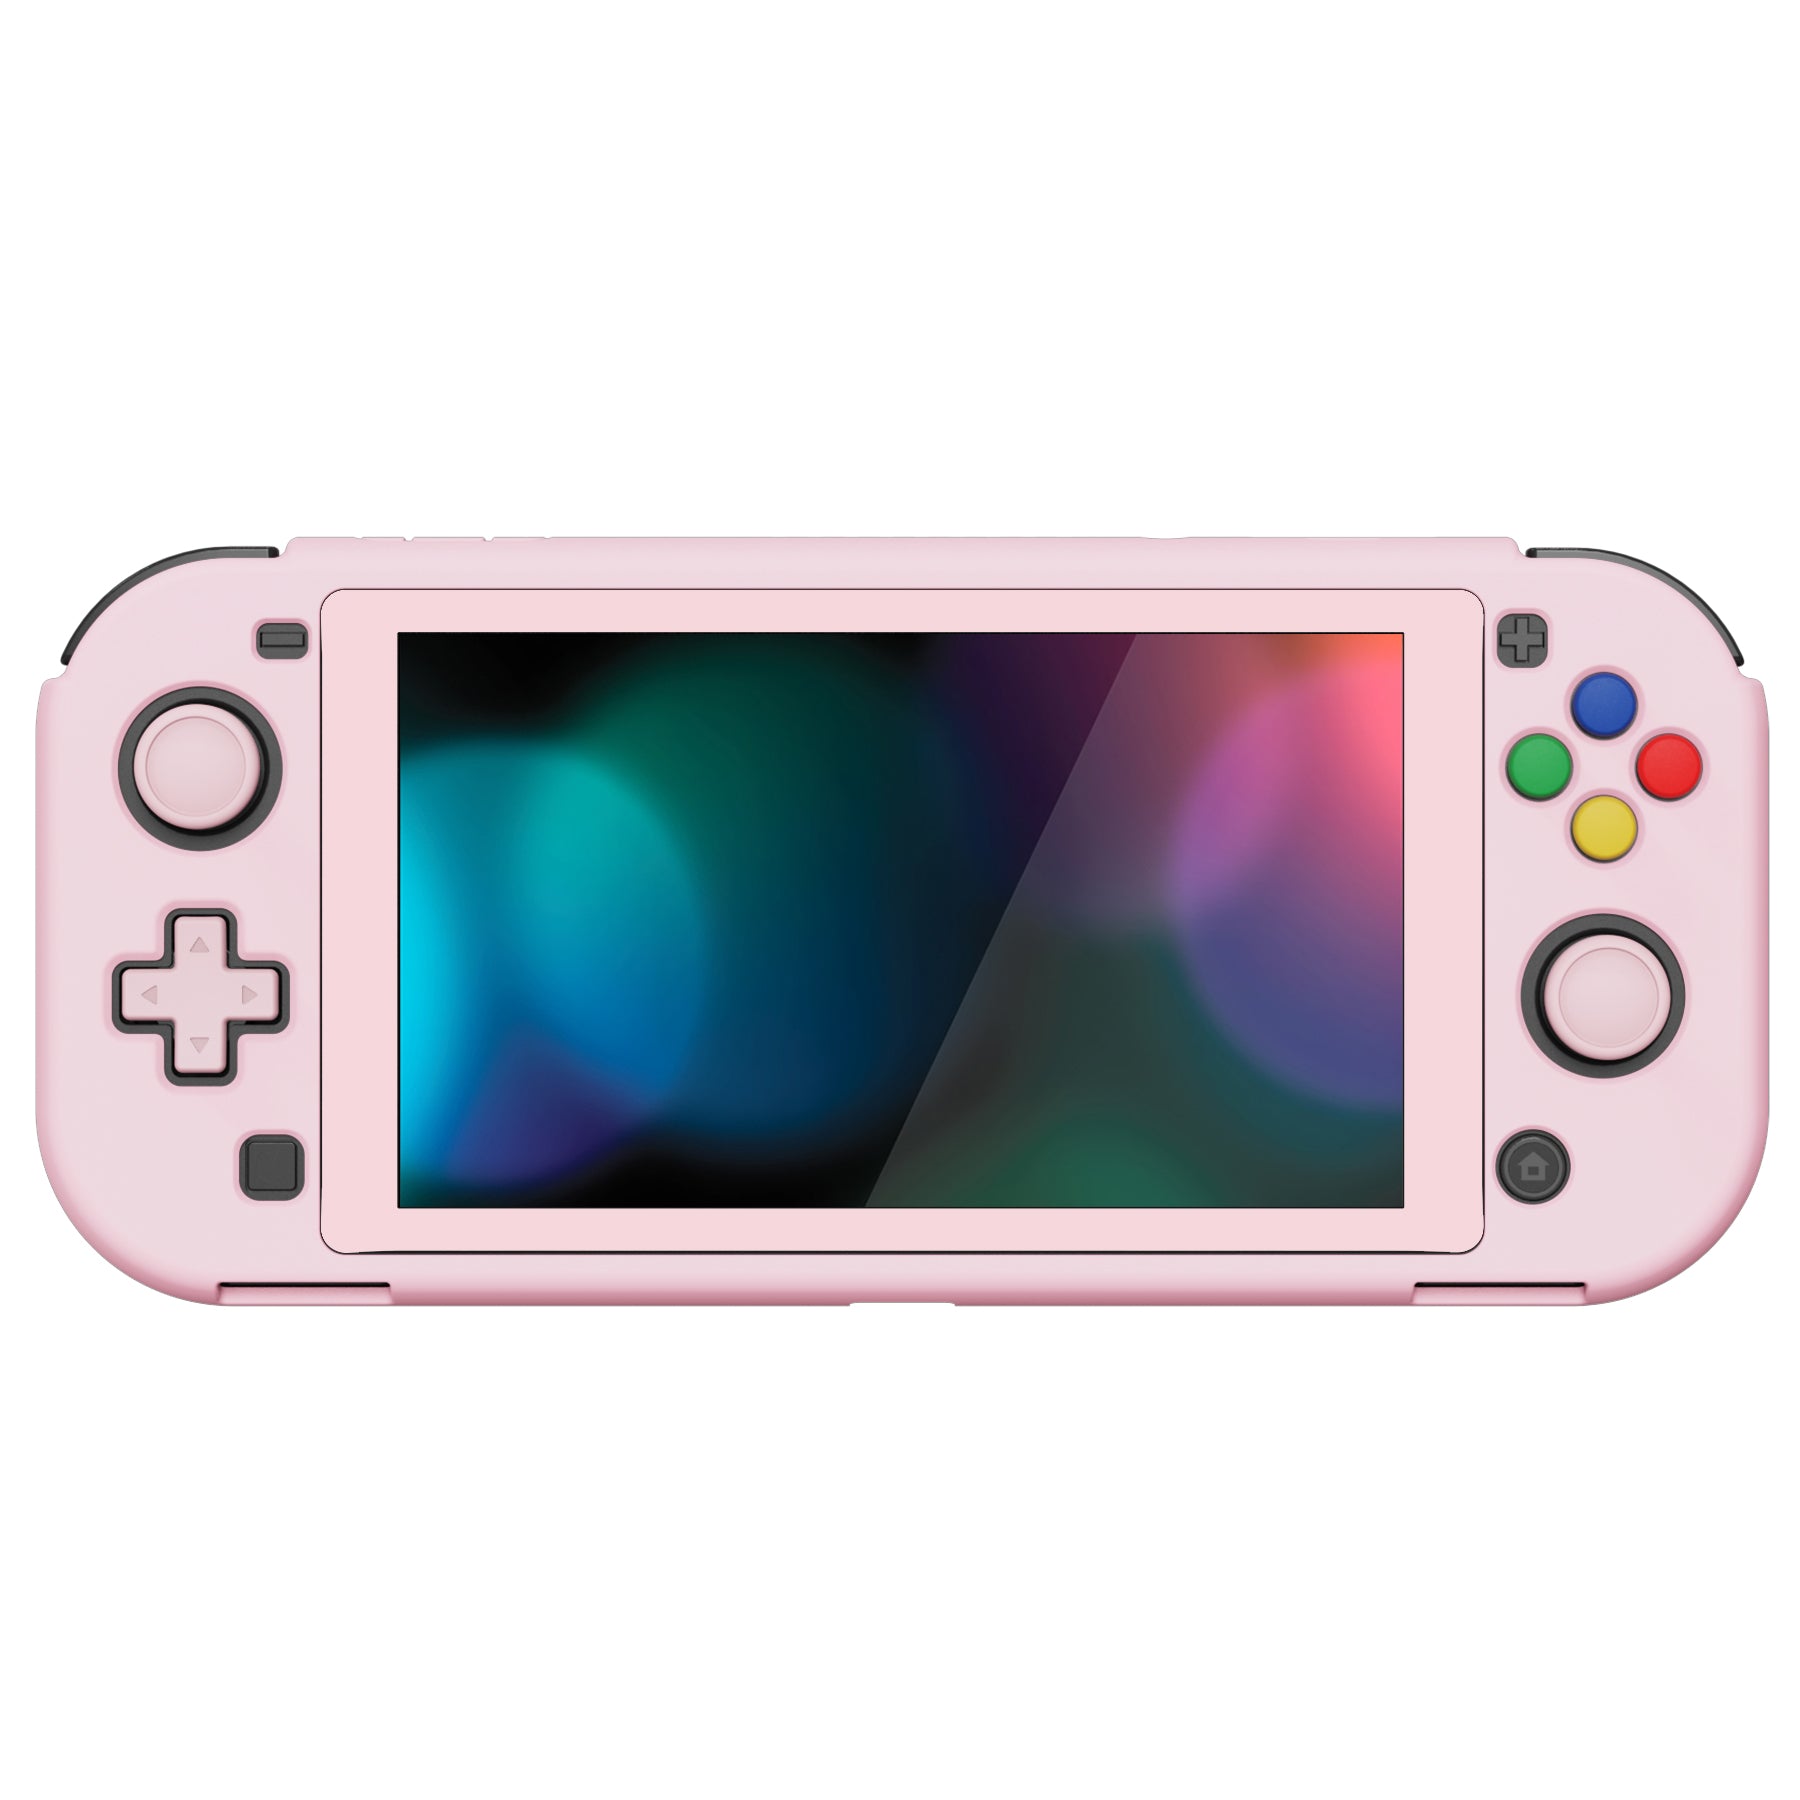 PlayVital ZealProtect Protective Case For Nintendo Switch Lite, Hard Shell  Ergonomic Grip Cover For Nintendo Switch Lite W/Screen Protector Thumb 